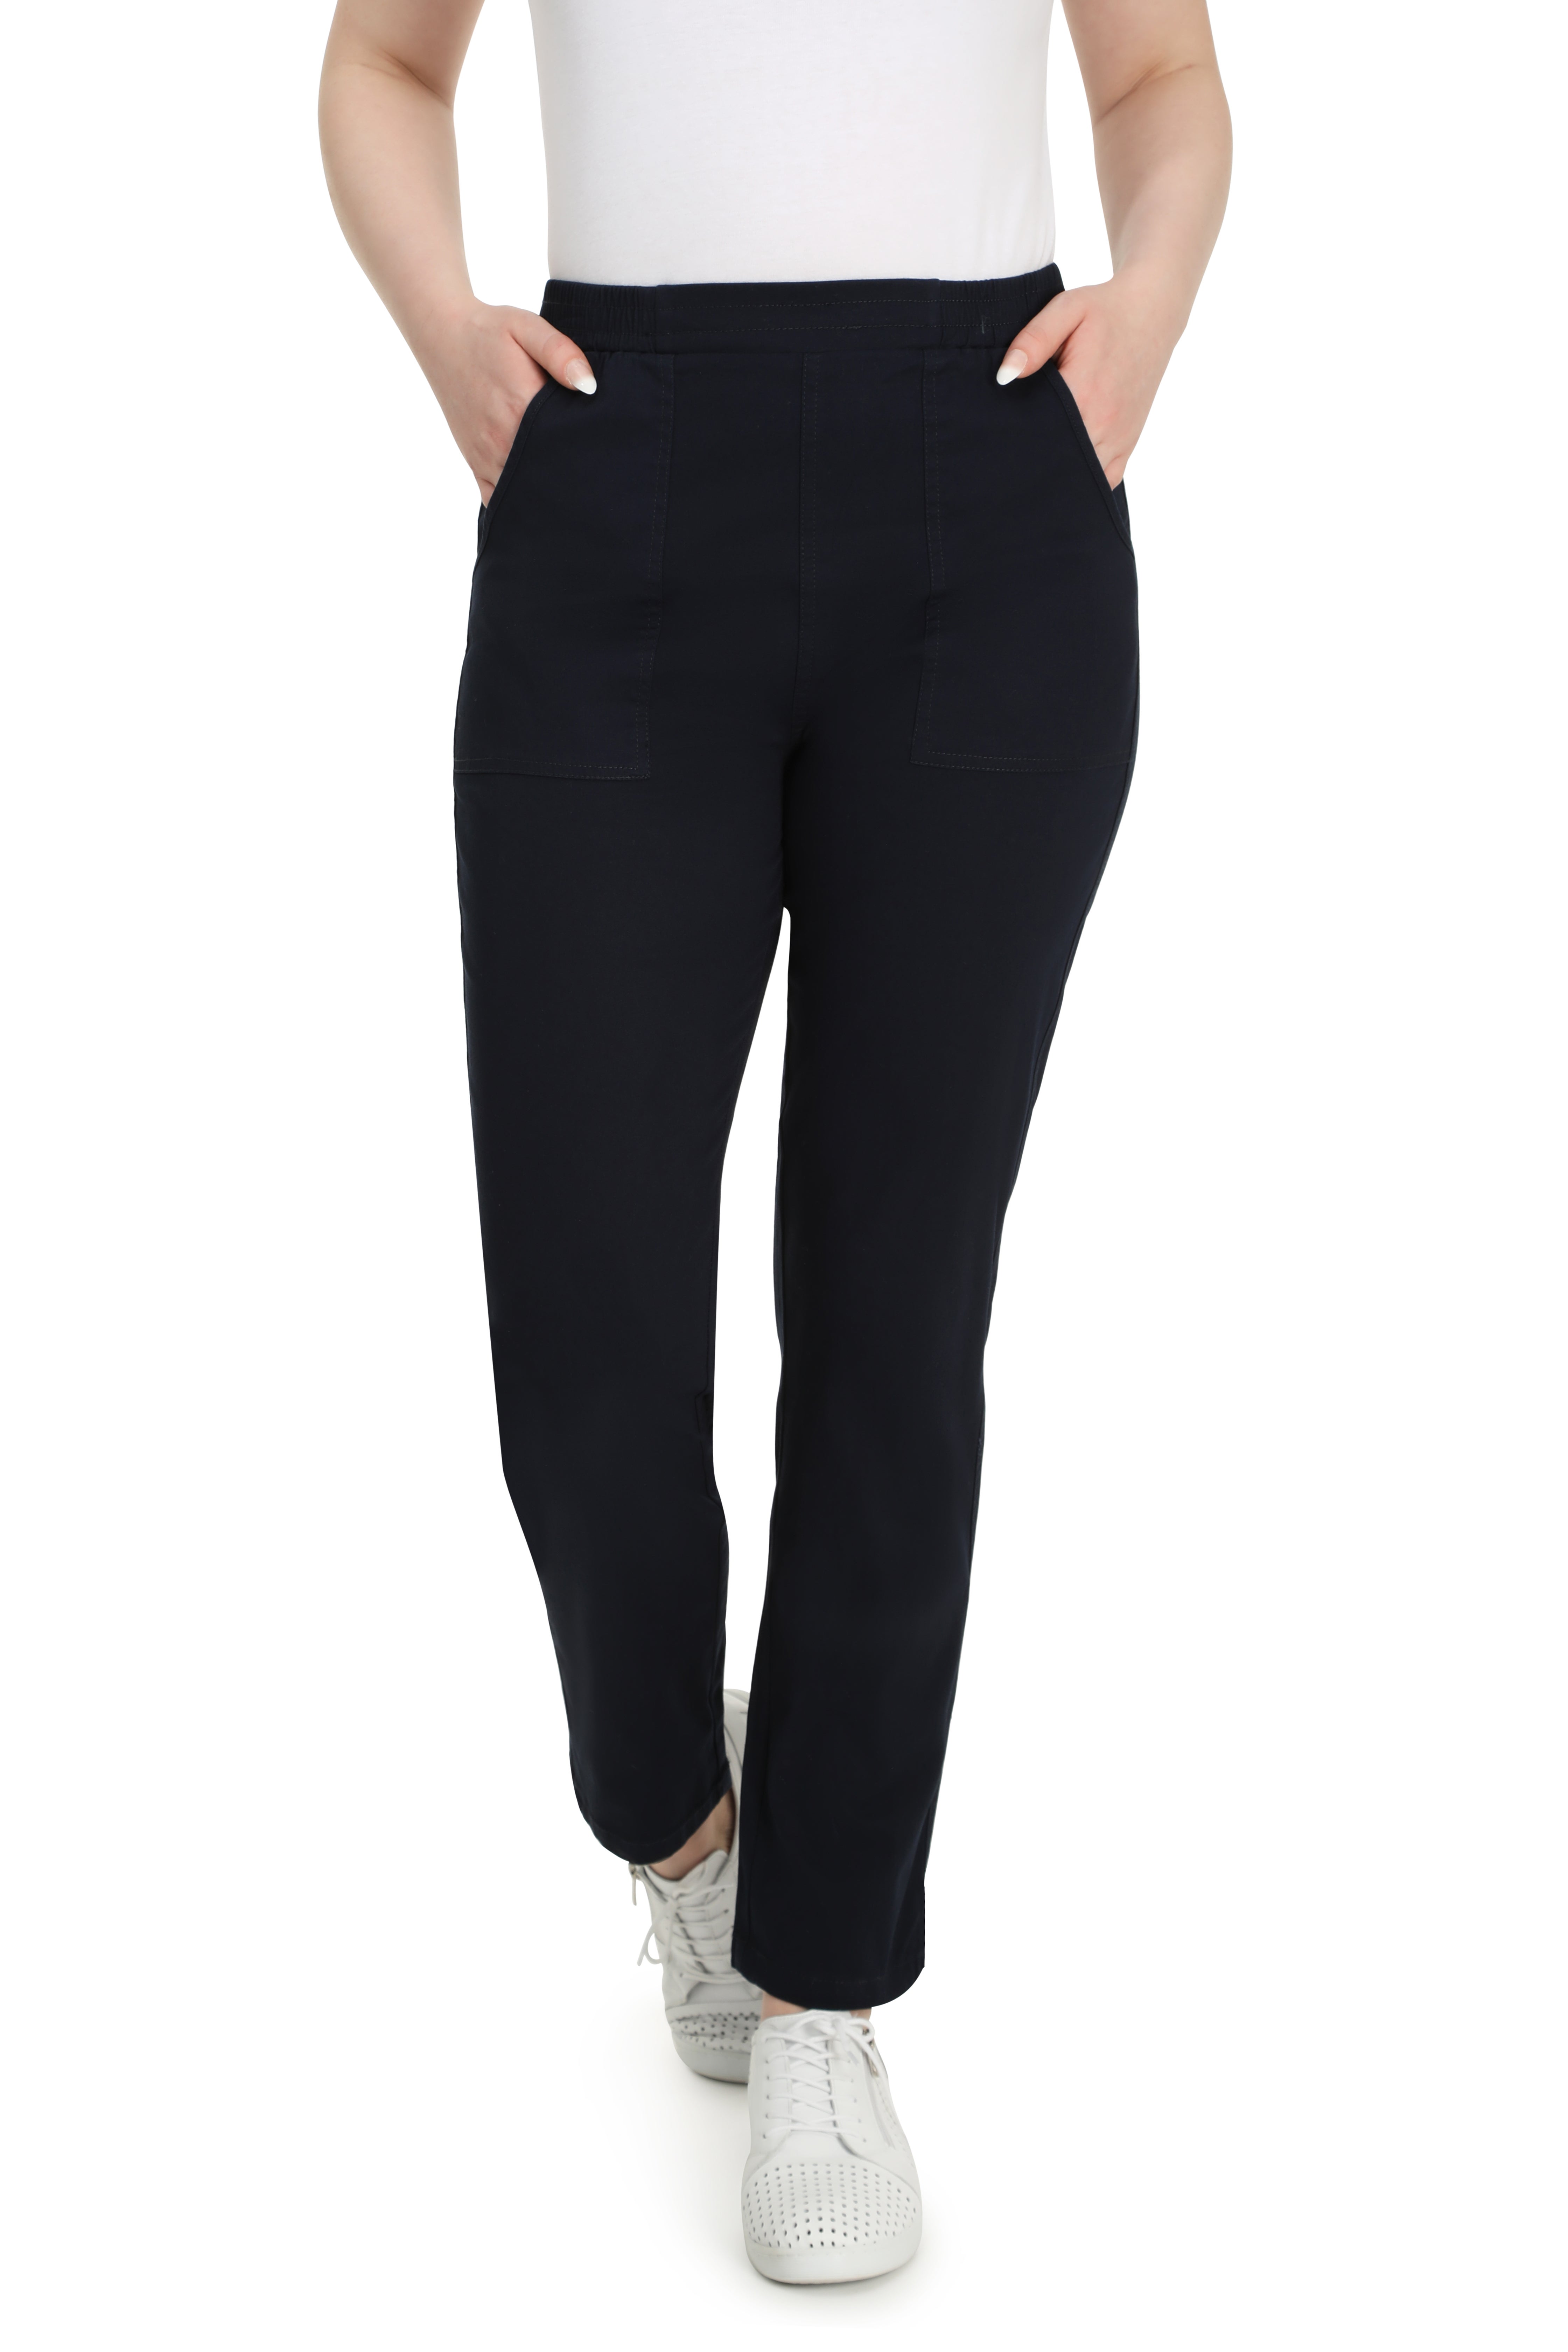 Buy Nordbury Women Cherry Berry Capri Trousers Ladies Three Quart Pants  Stretch Knee Length Cropped 3/4 Trouser Elasticated Cotton Joggers Online  in India - Etsy